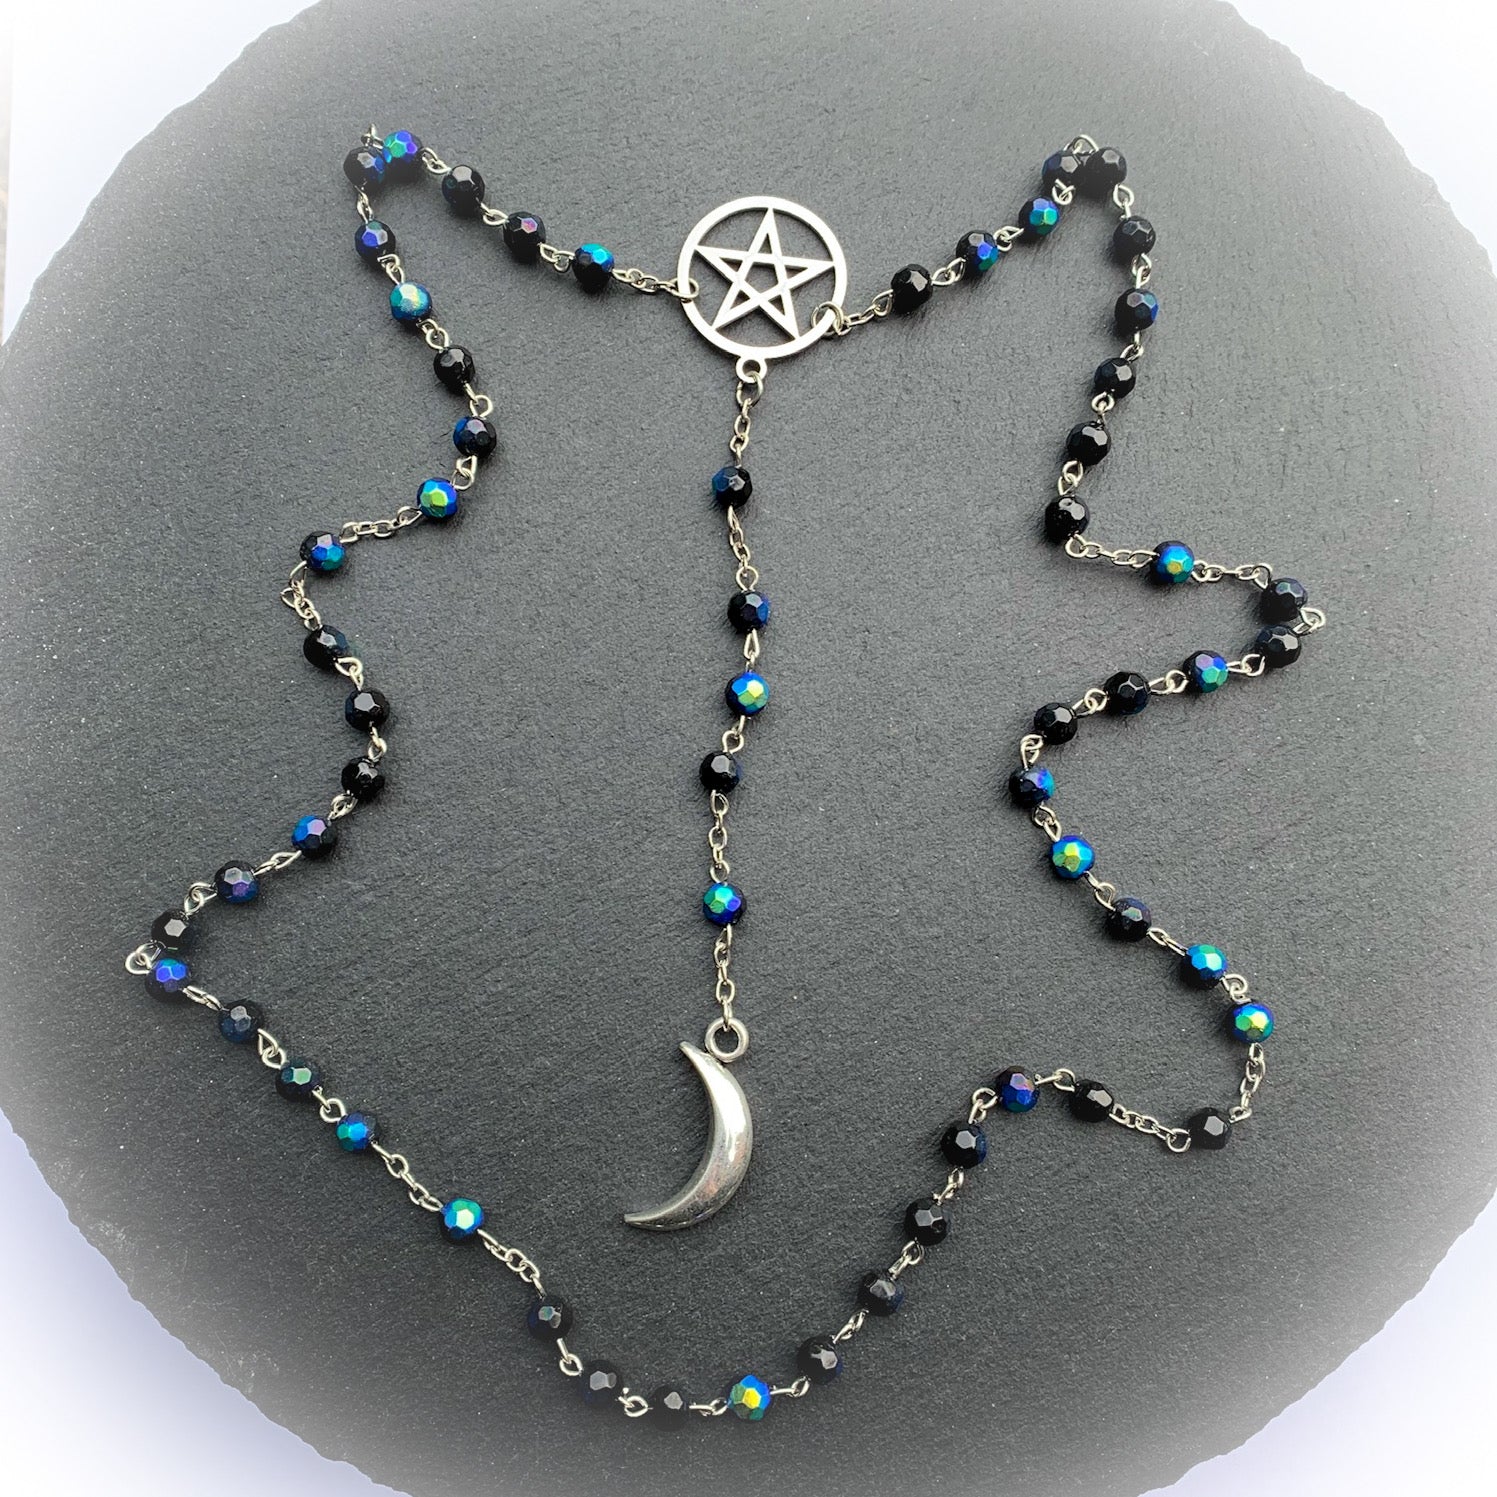 Long Gothic Crescent Moon Necklace.Spirit Moon Rosary Necklace Wicca Pagan  Rosary Black Beads Charm Jewelry | Wish